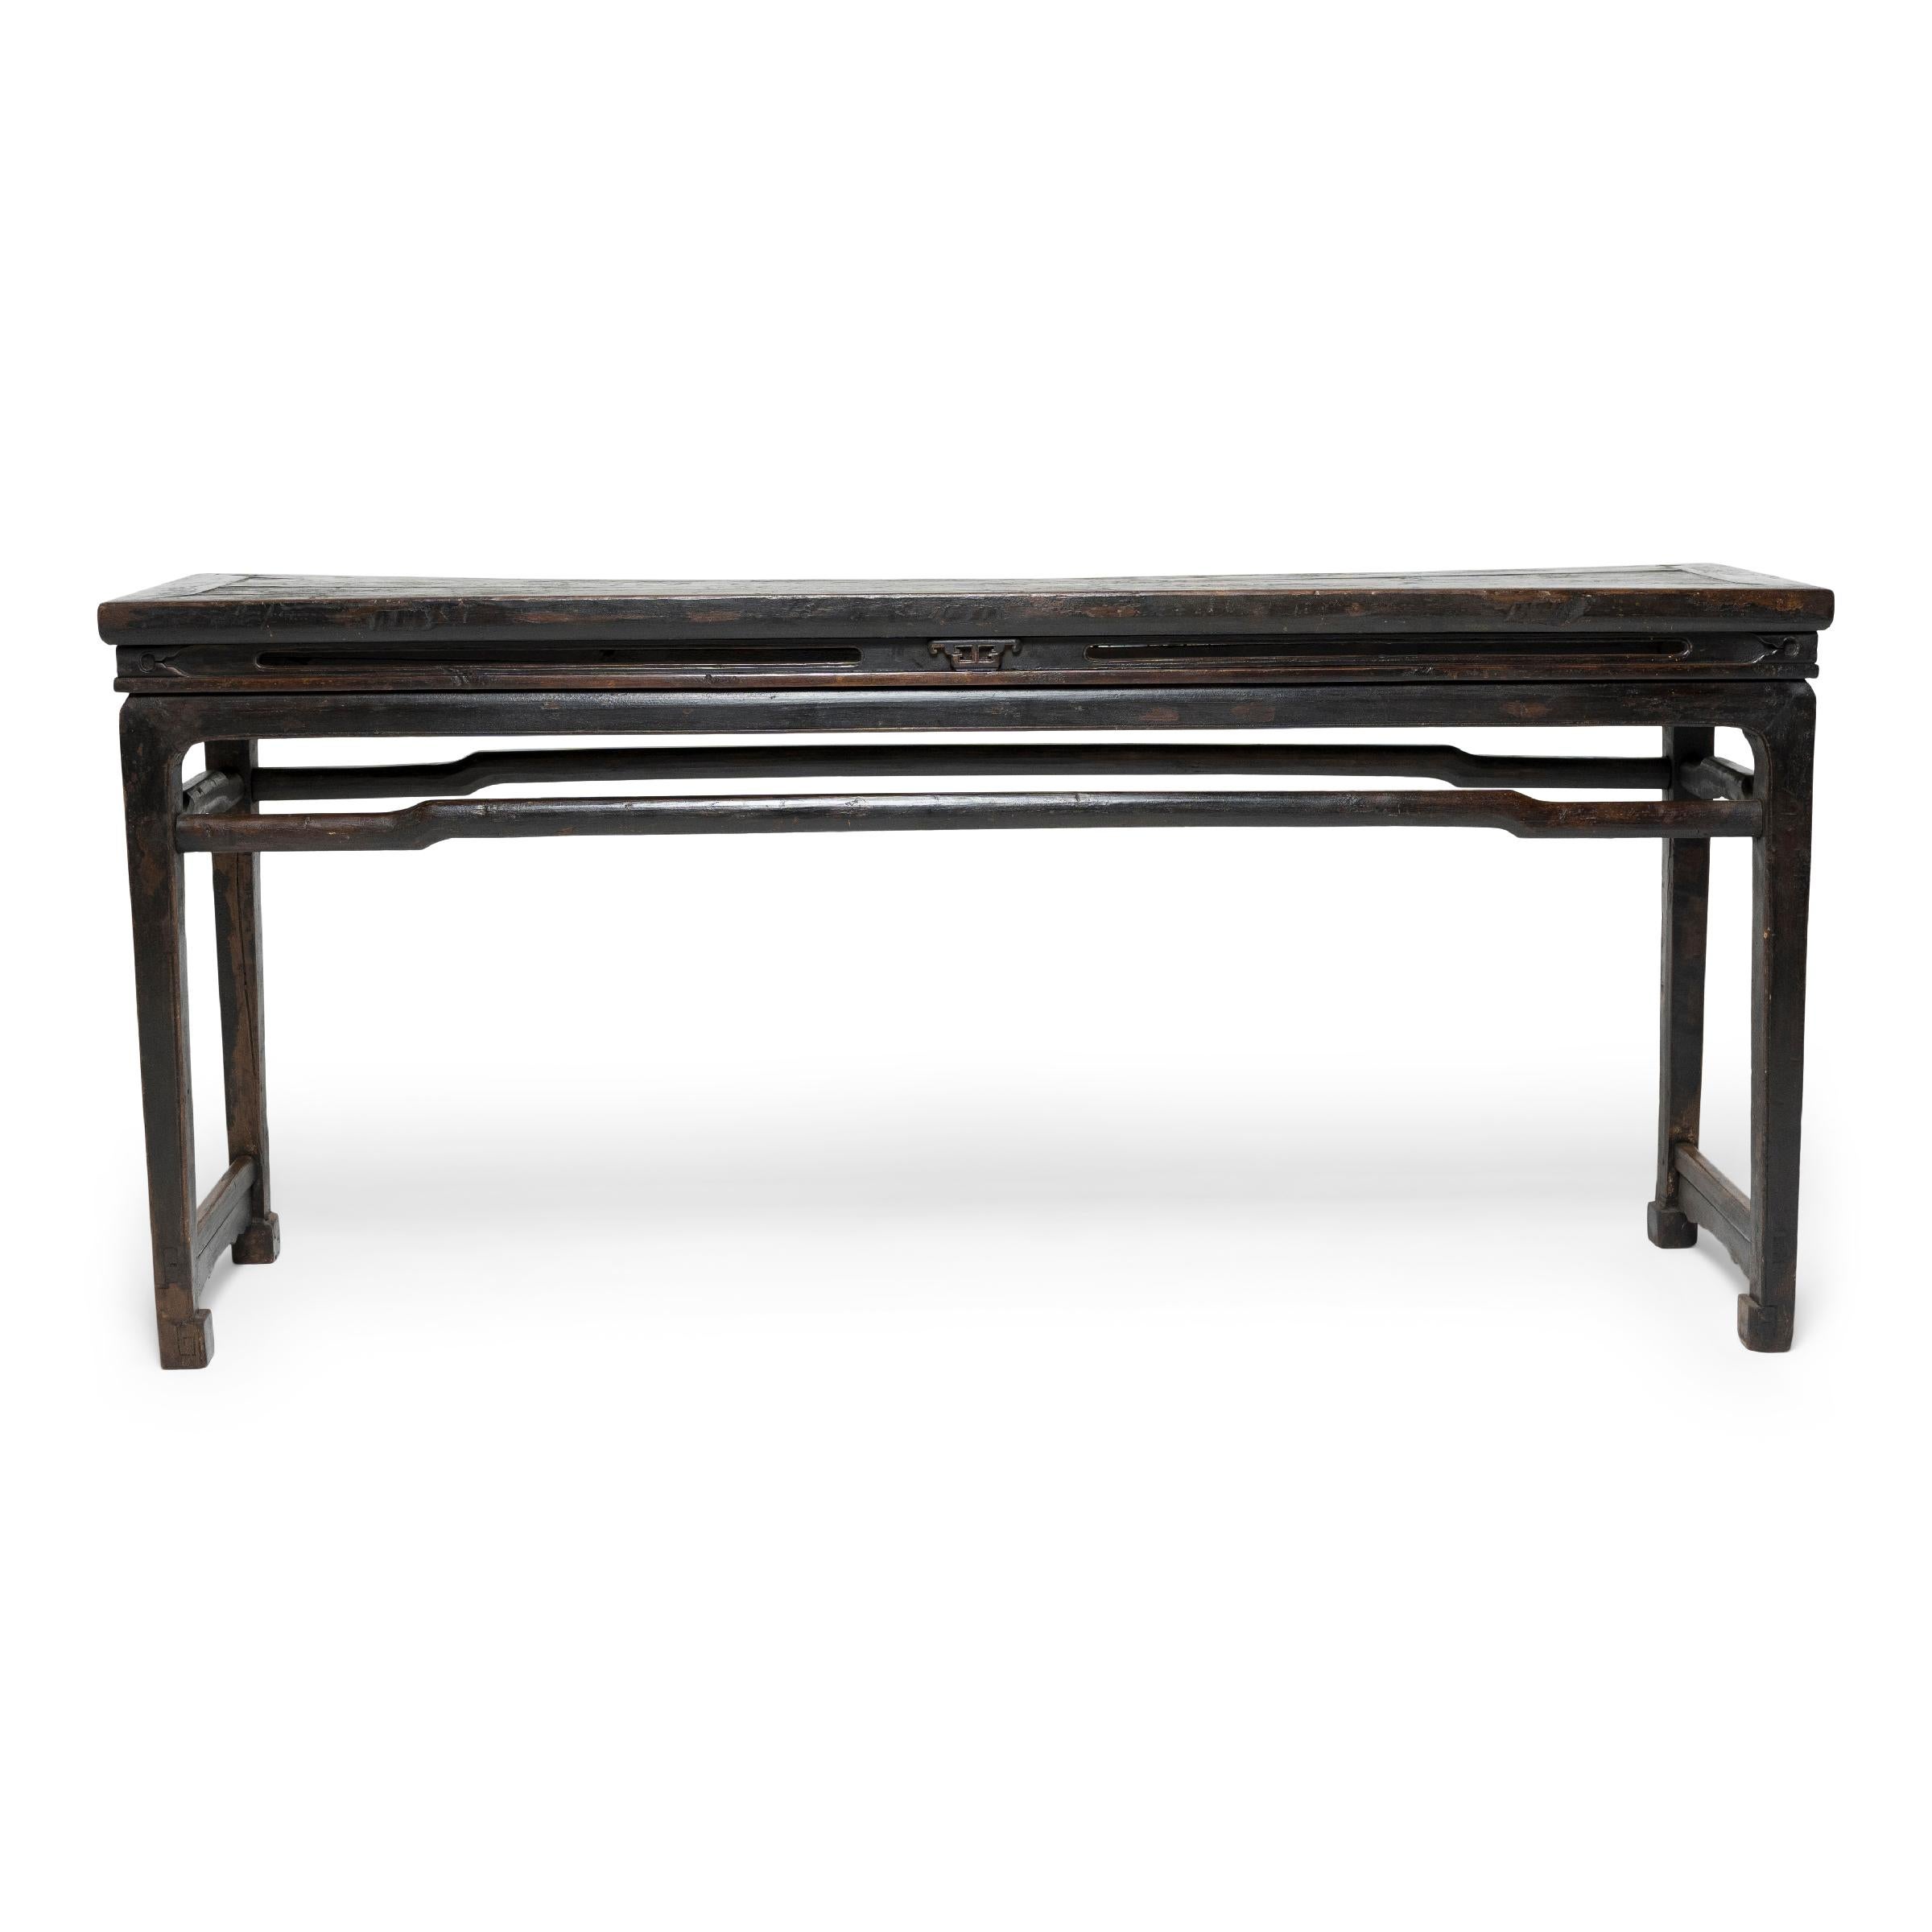 Perfected in the Ming dynasty, complex joinery techniques allowed craftsmen to create furniture with flowing lines, a sense of lightness, and remarkable durability. Crafted using traditional methods, this 19th-century offering table is a beautiful